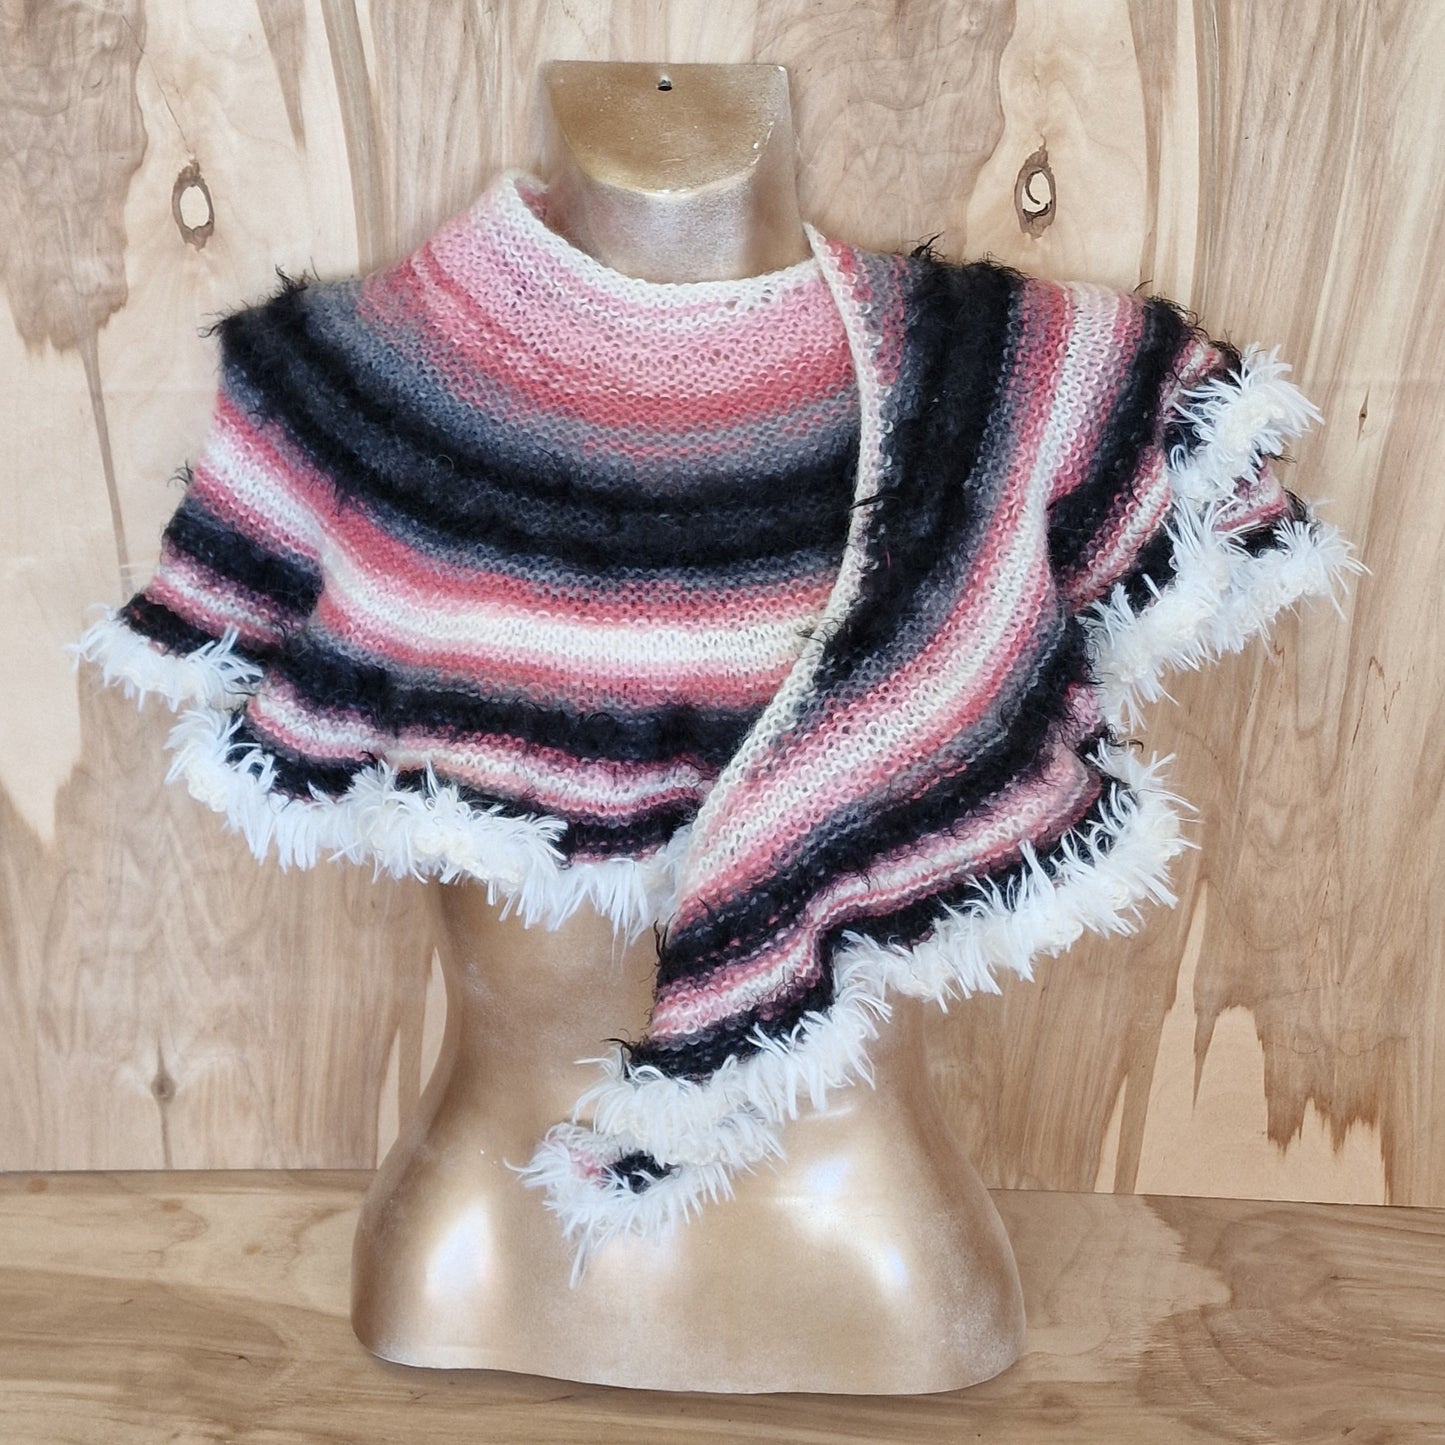 Hand-knitted round scarf pink/black/white (MY 22)